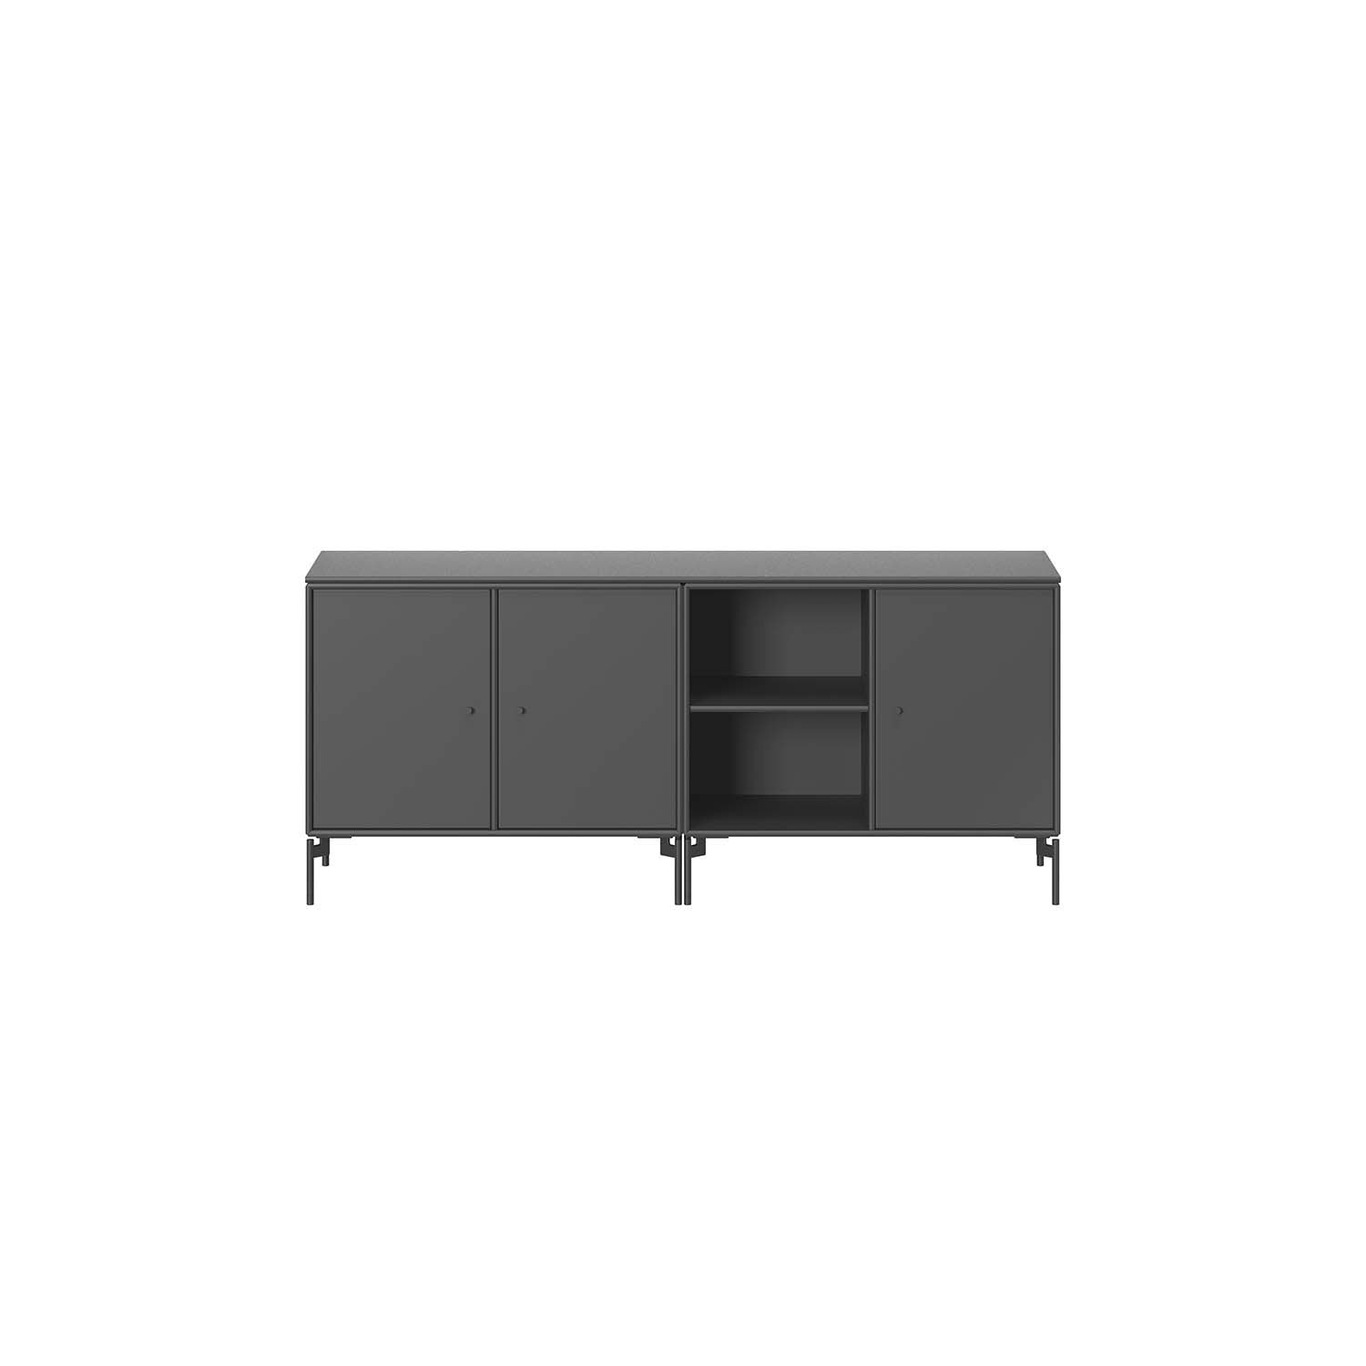 Save Sideboard, Anthracite